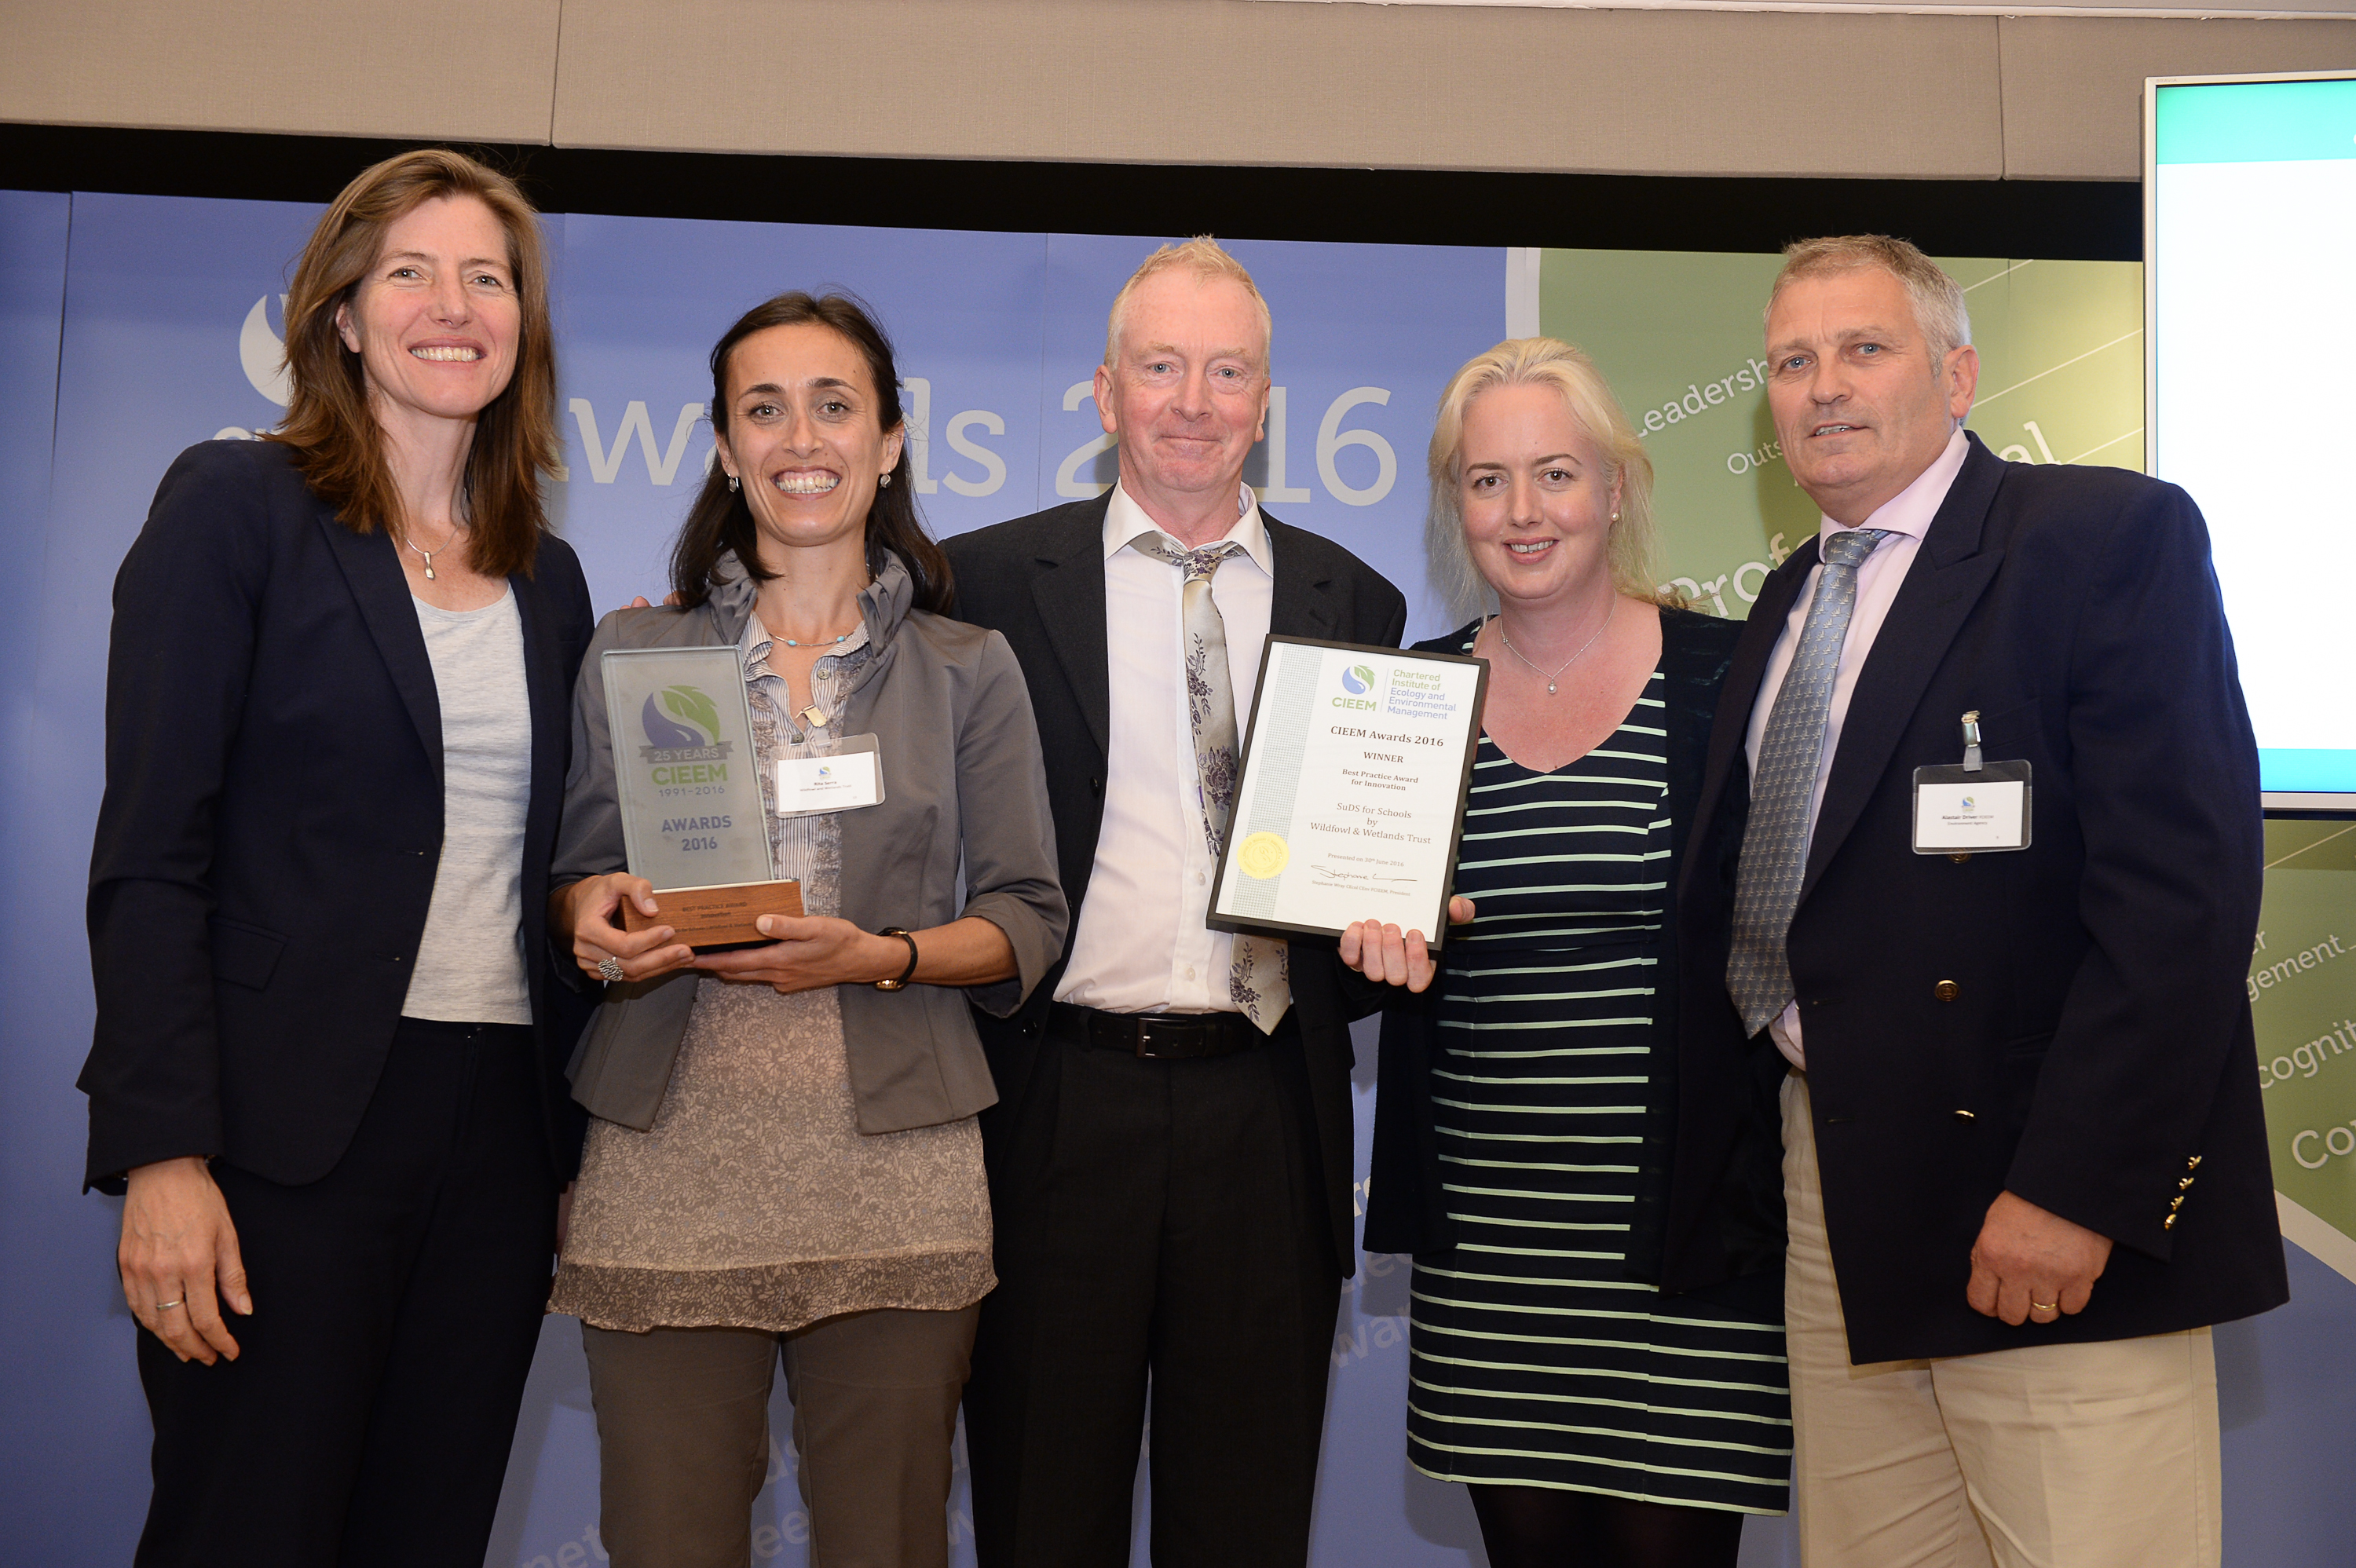 Wildlife Trusts CEO Stephanie Hilborne presents the CIEEM Award to WWT SuDS Project Officer Rita Serra, Andy Graham, Rosemary Waugh and Alastair Driver